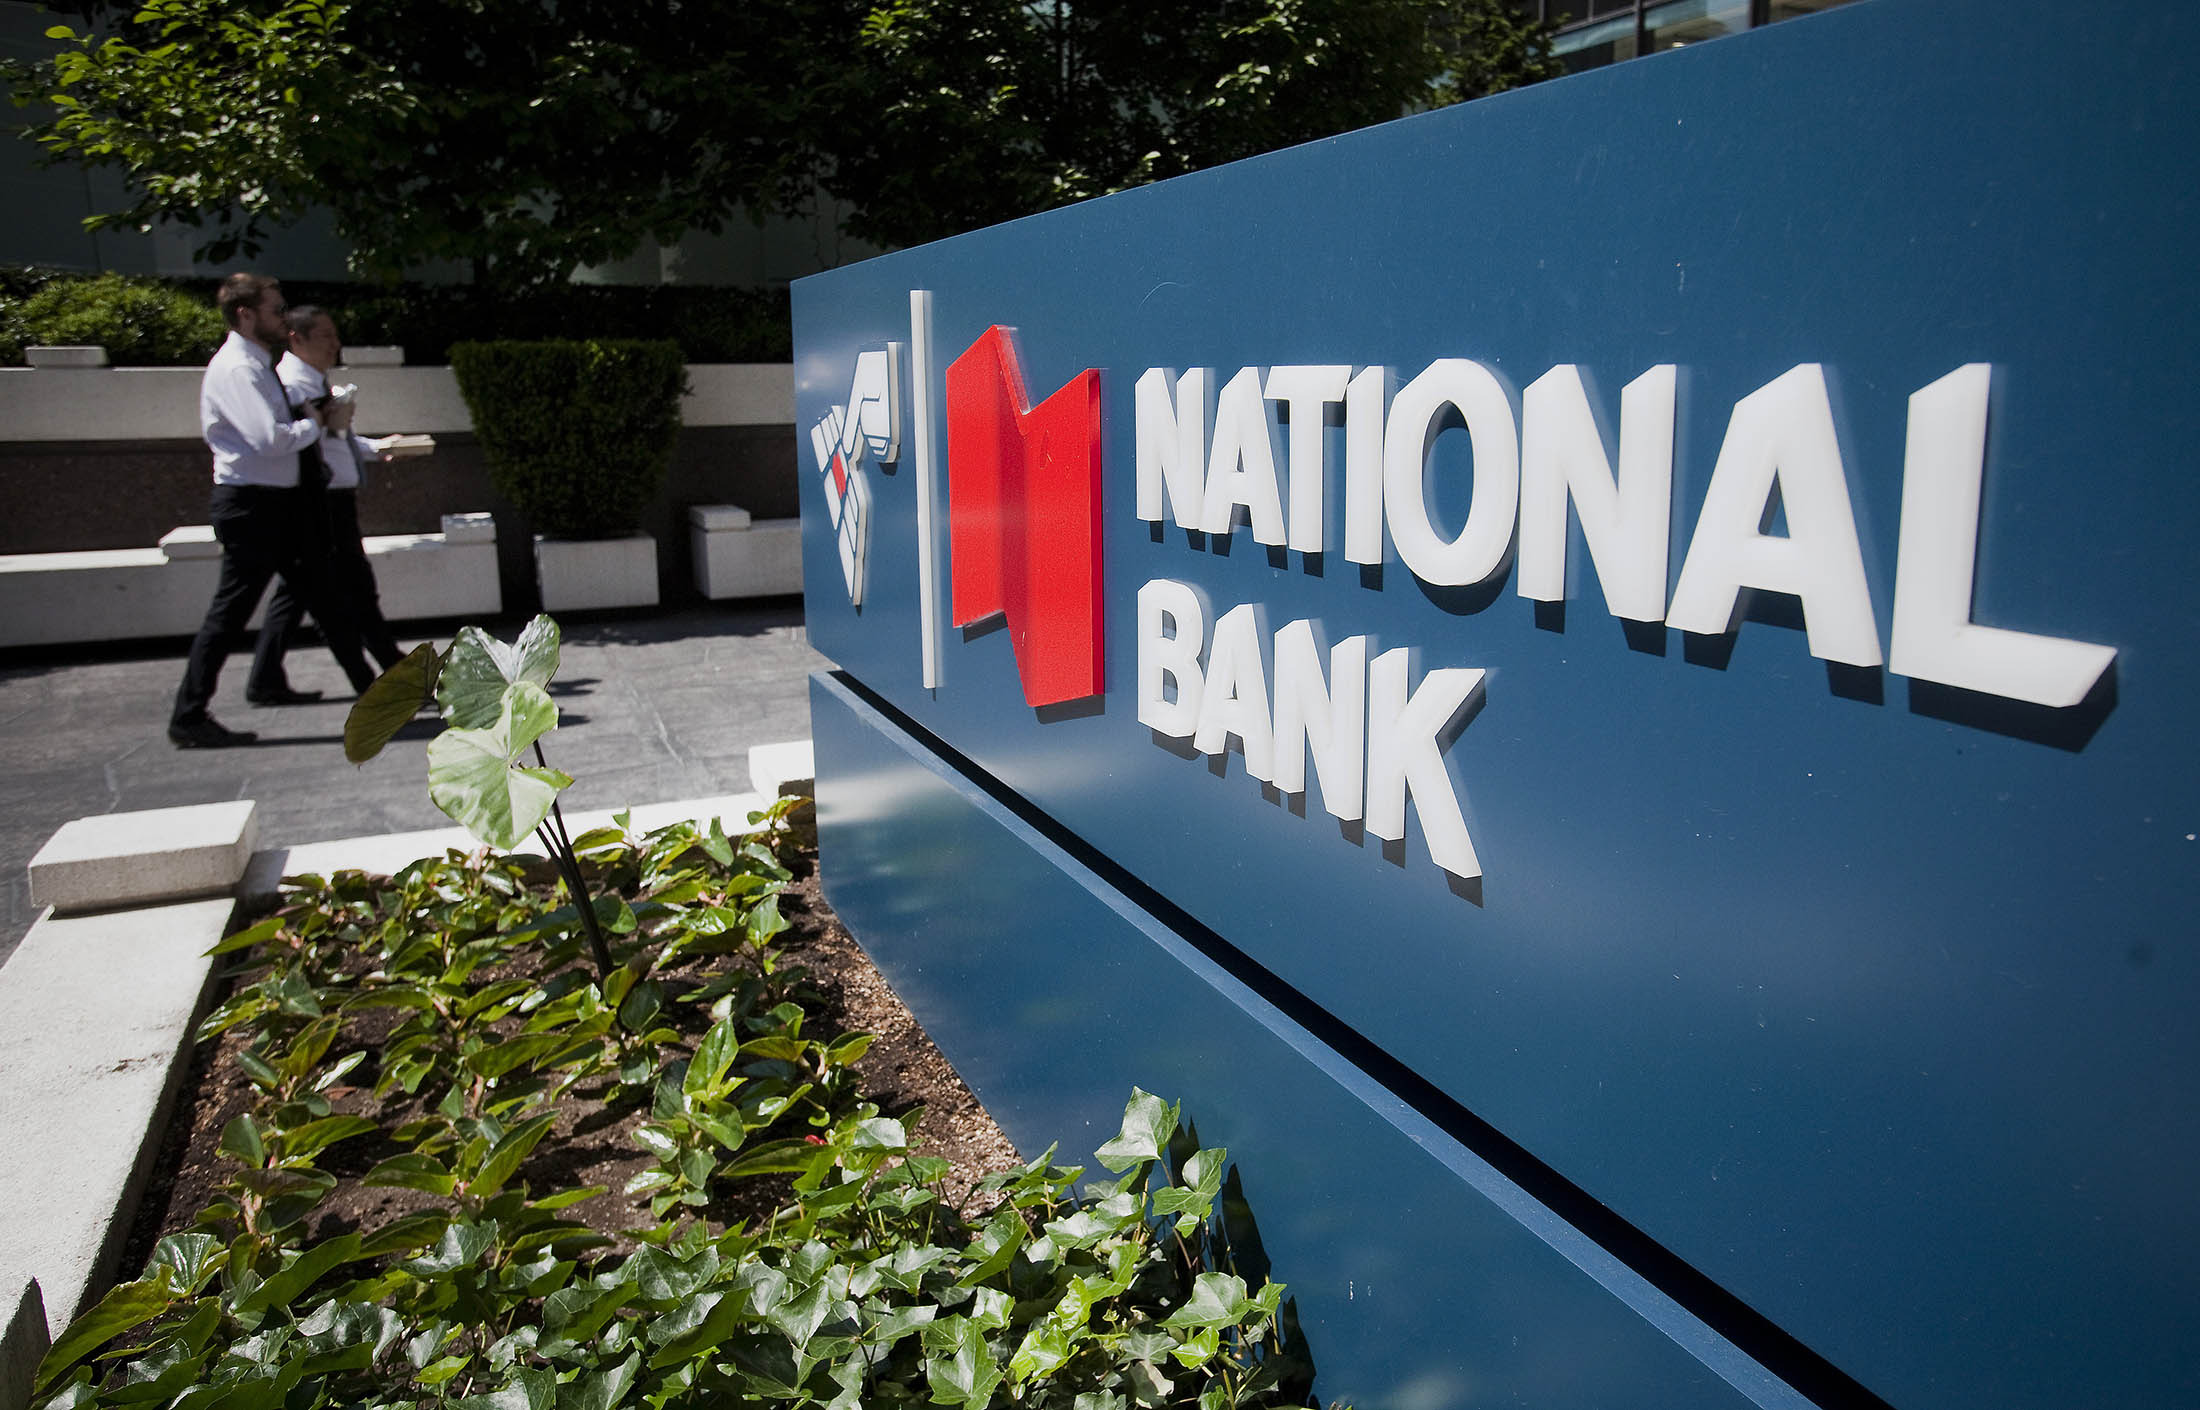 Pedestrians walk past National Bank of Canada signage in downtown Vancouver, British Columbia, Canada, on Thursday, Monday, May 28, 2015. National Bank, Canada's sixth-largest lender, reported a 12 percent increase in net income to C$404 million and raised its dividend 4 percent to 52 cents a share.
